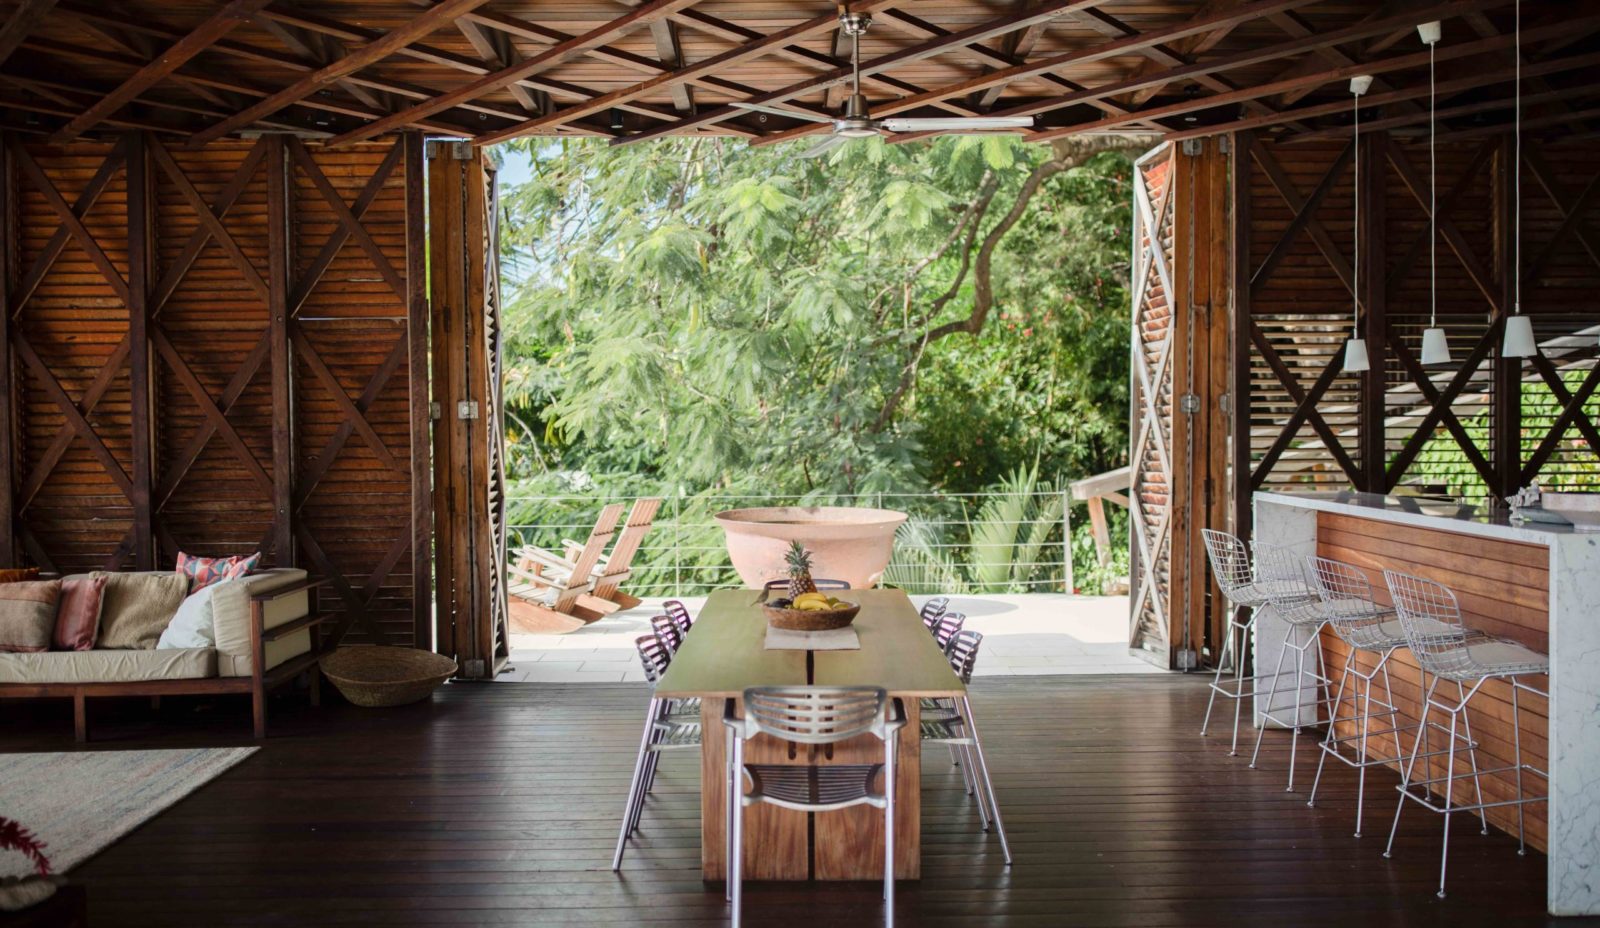 The dining area inside the wooden Cantilever at Cosmos St Lucia features a dining table for 8, with the Marble Bars and 4 stools on the right, and lounge seating on the left, looking out onto a mango tree in the garden